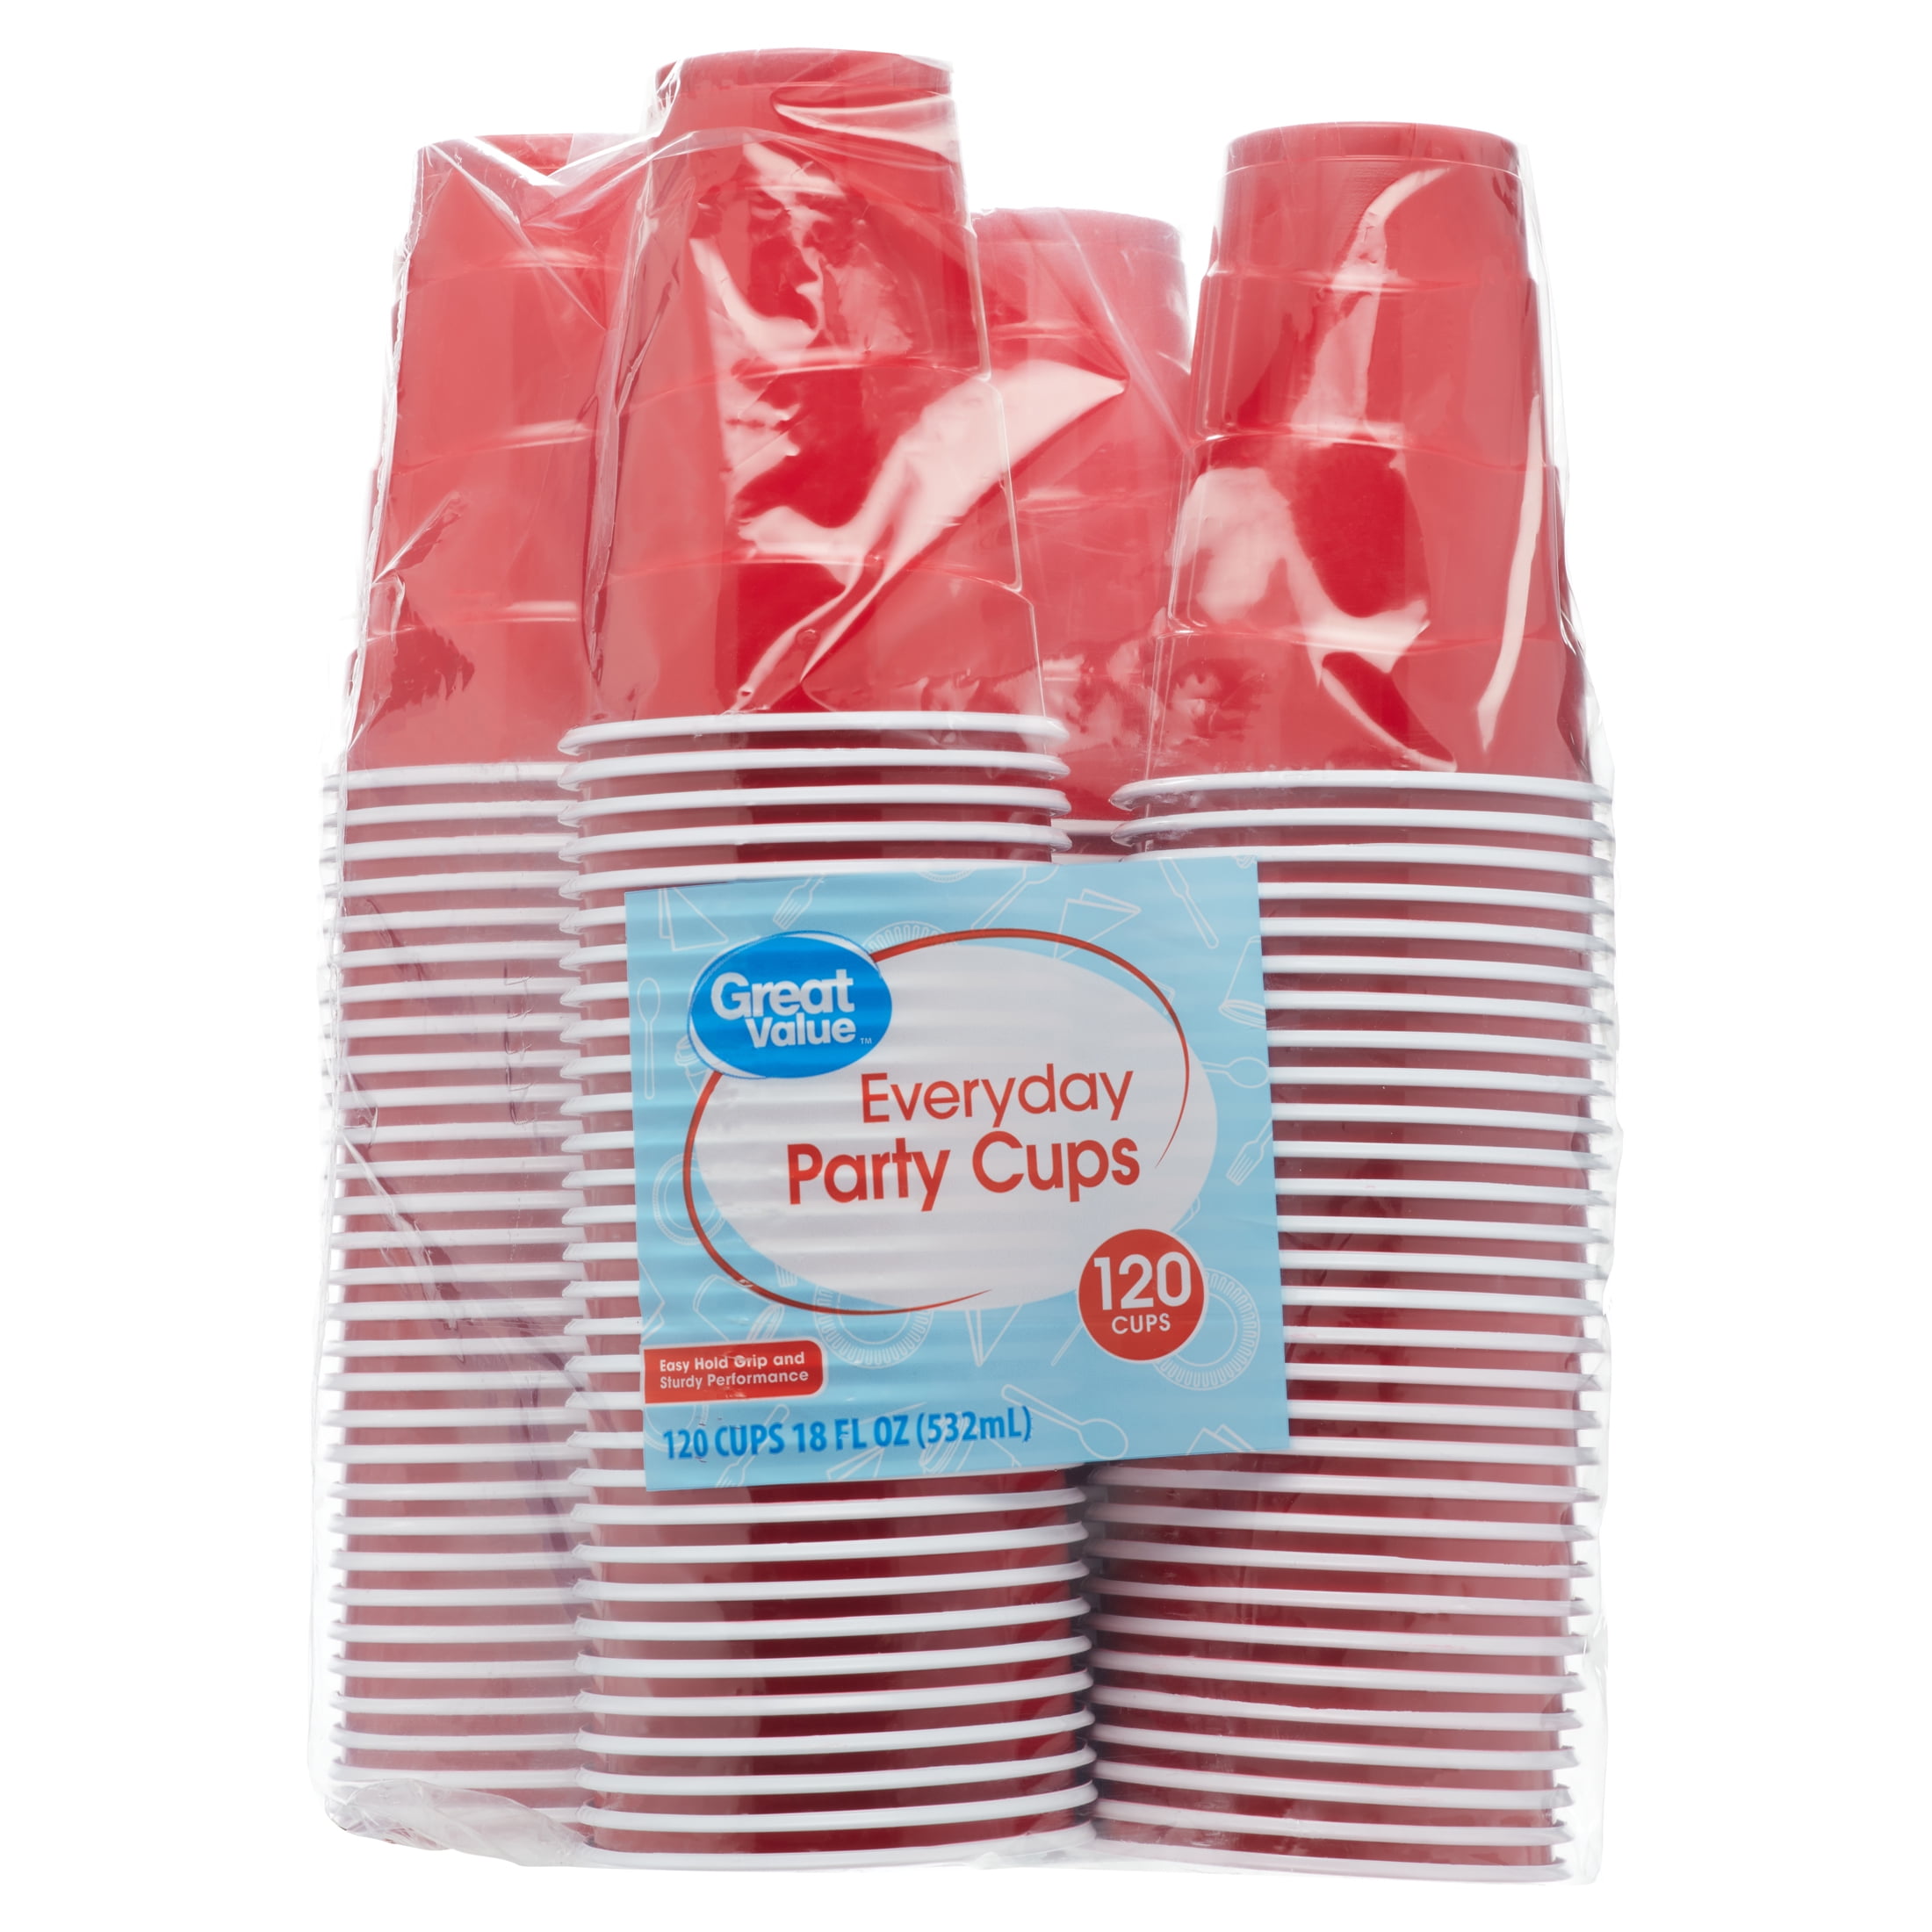 Glad Everyday Disposable Plastic Cups for Everyday Use | Red Plastic Cups  Strong and Sturdy Red Plas…See more Glad Everyday Disposable Plastic Cups